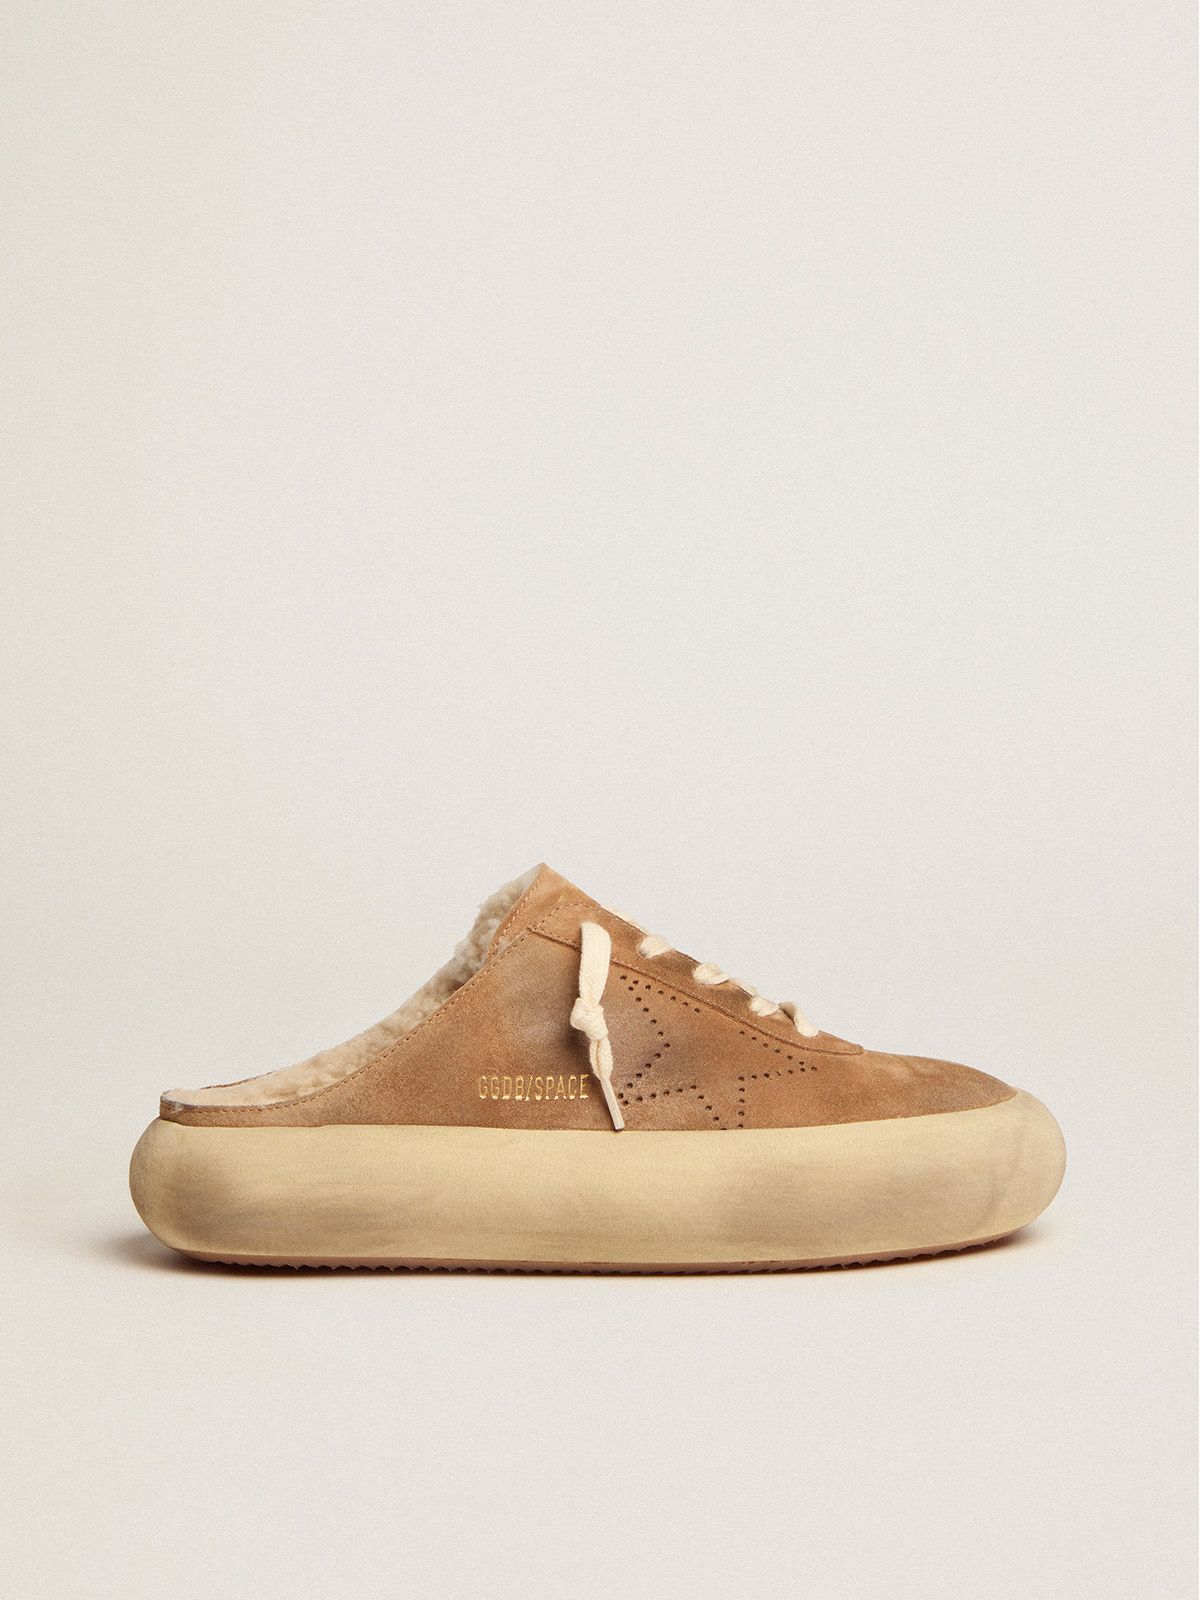 Golden Goose Saldi Space-Star Sabot shoes in tobacco-colored suede with shearling lining